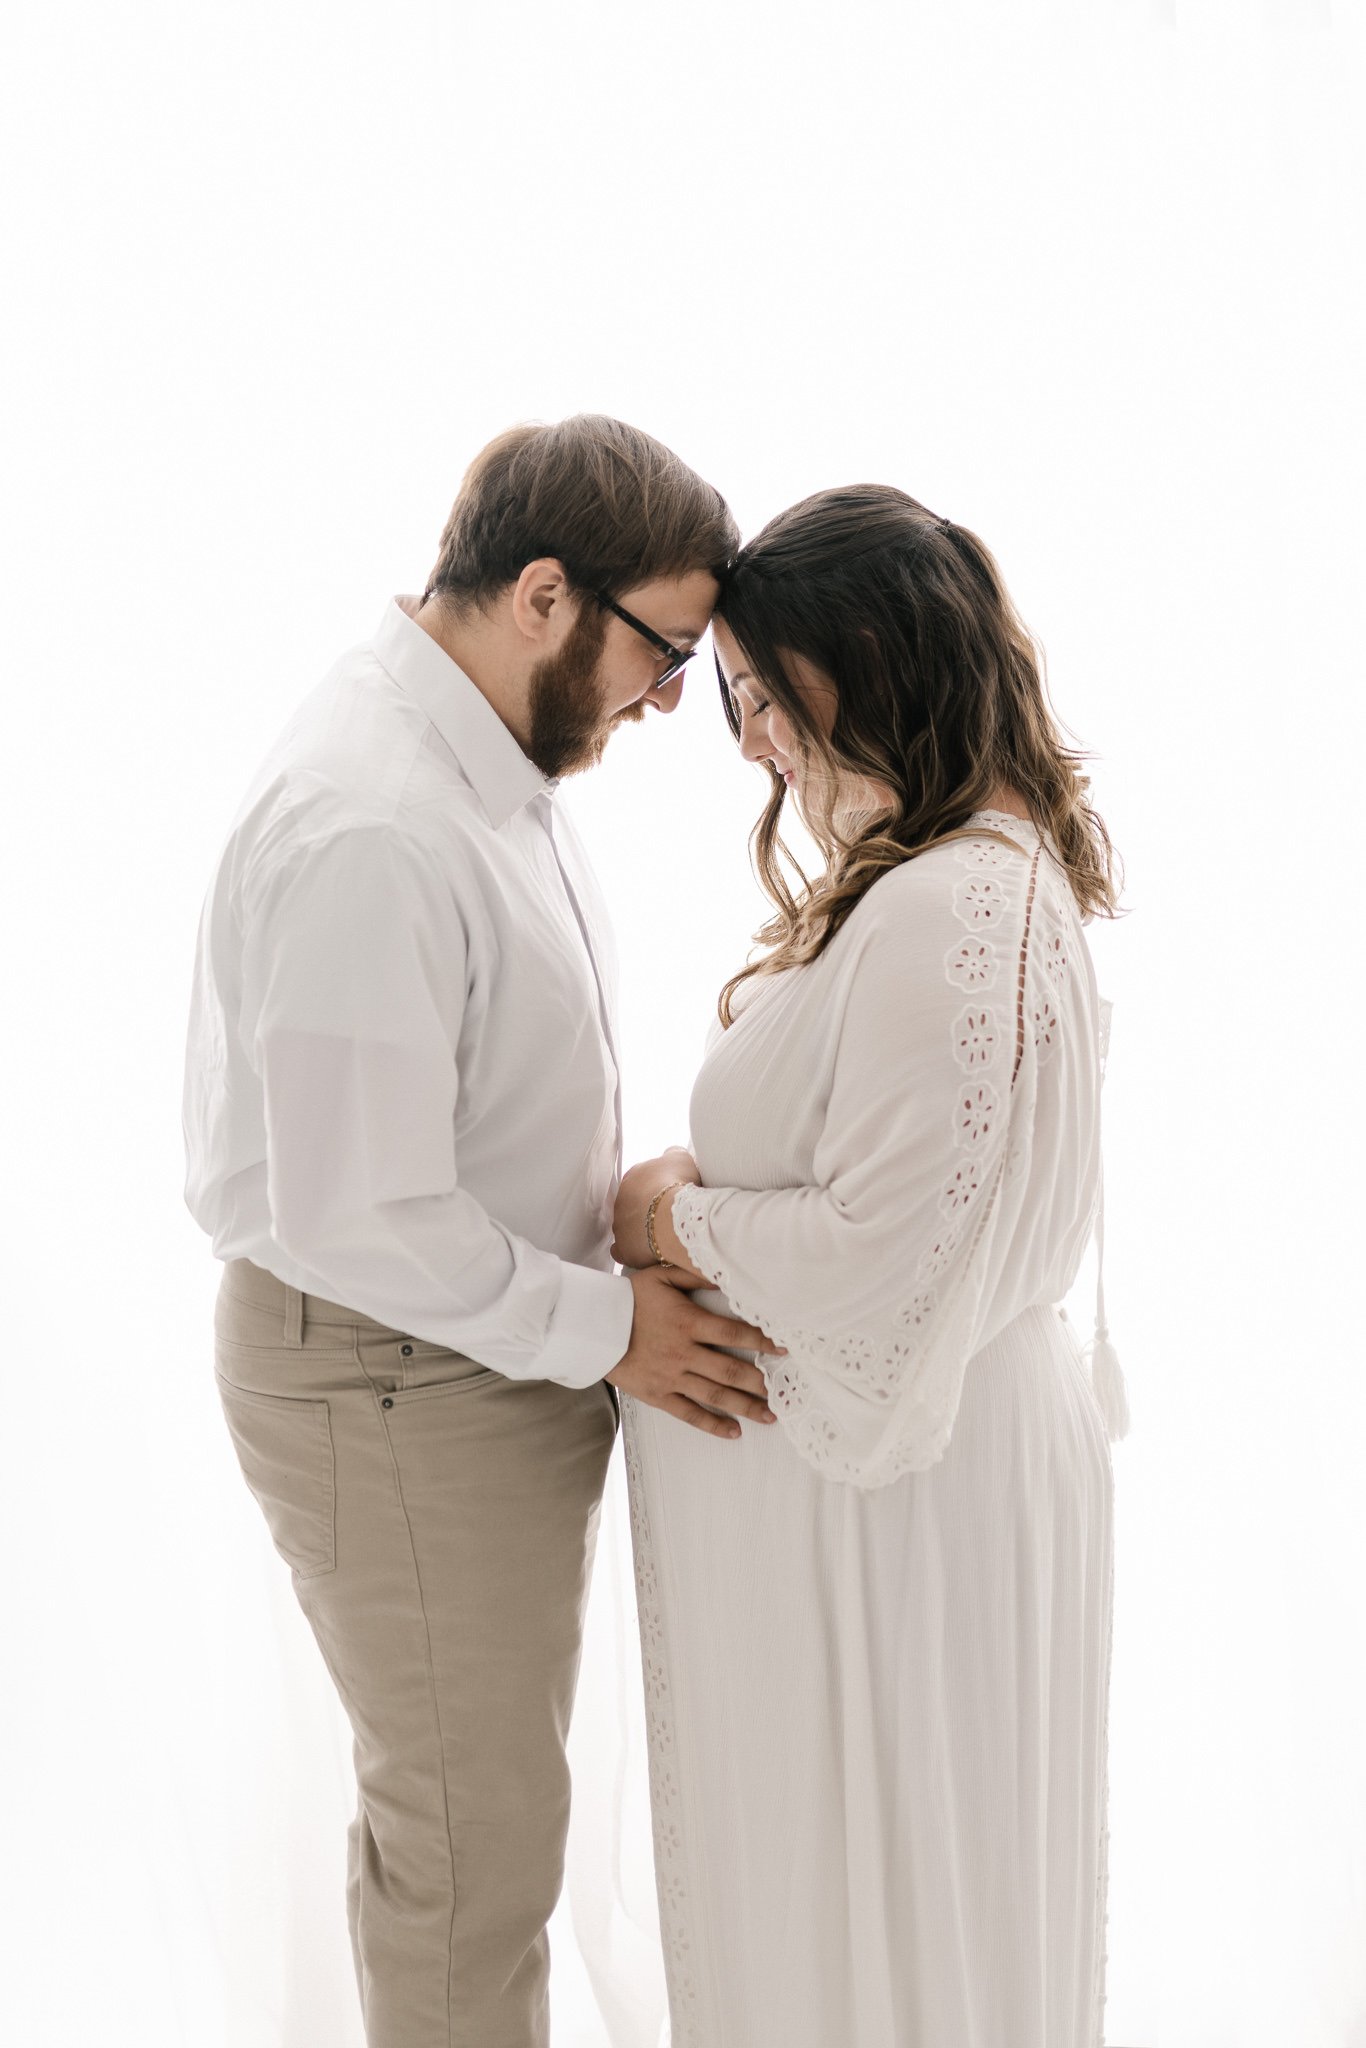  Two parents to be with head together at a white studio in New Jersey by Nicole Hawkins Photography. profile of parents to be new jersey photographers #NicoleHawkinsPhotography #NicoleHawkinsMaternity #Babyontheway #studiomaternityNJ #whitestudiomate